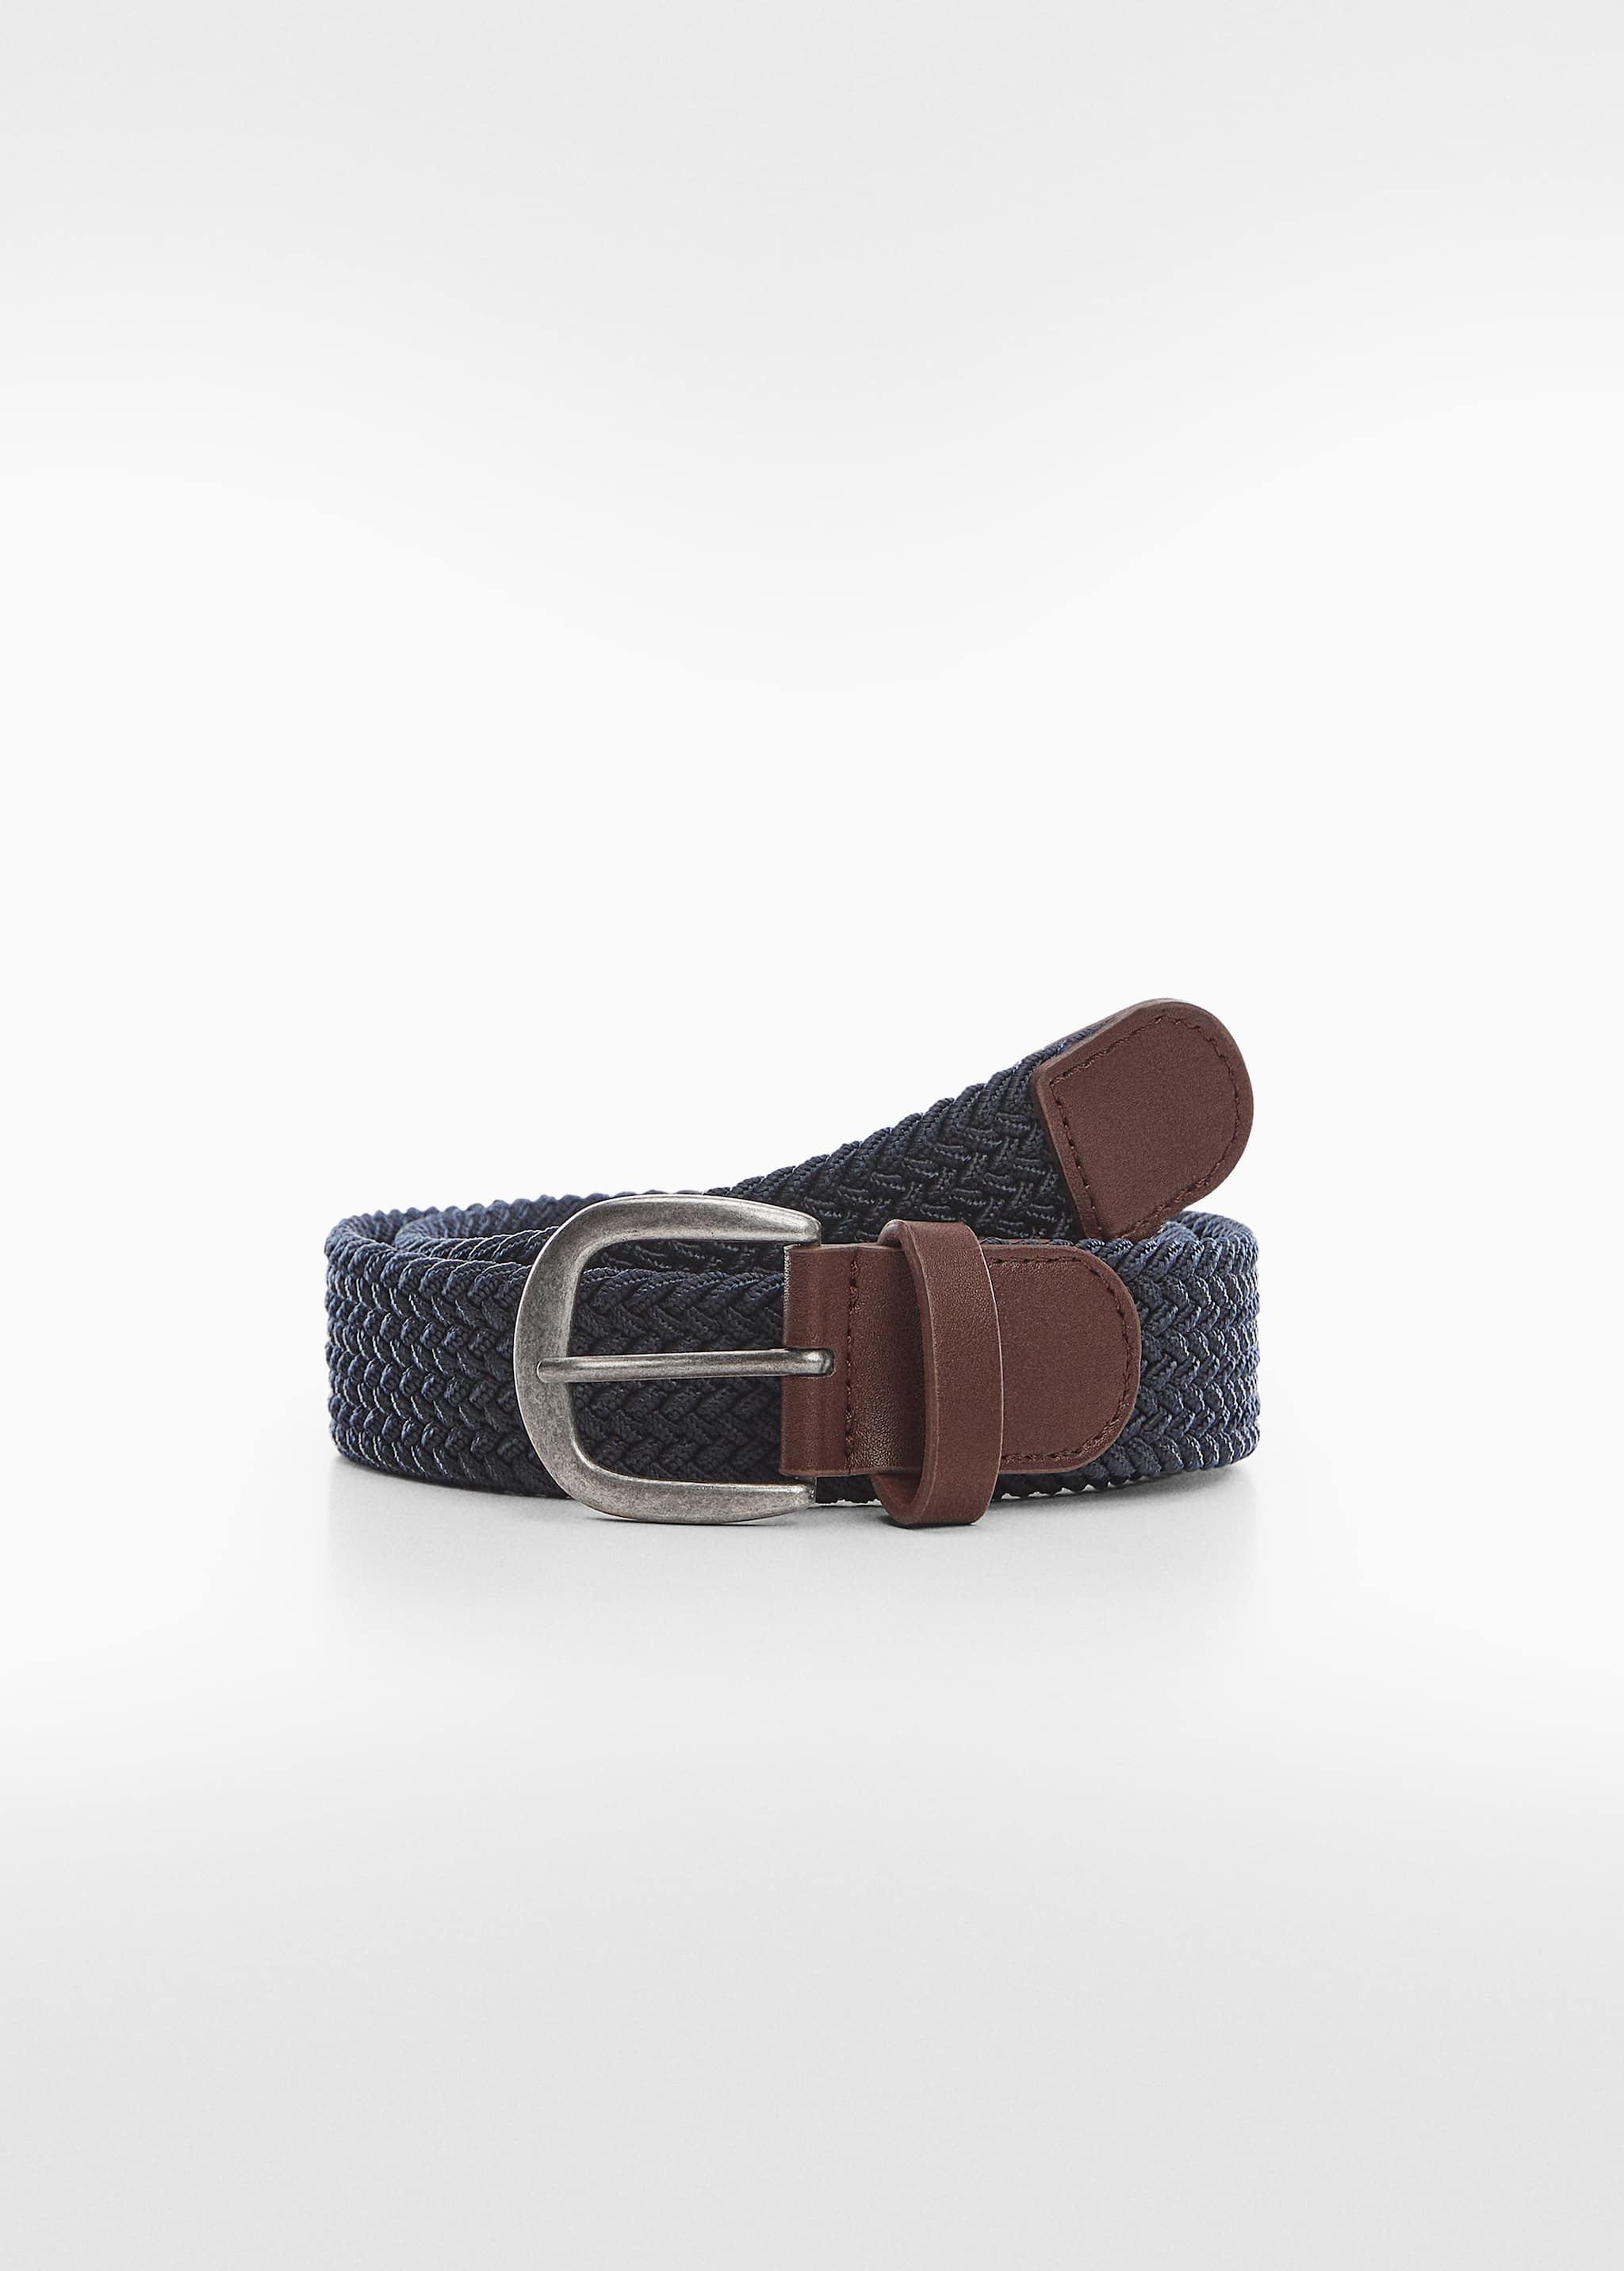 Braided buckle belt - Article without model